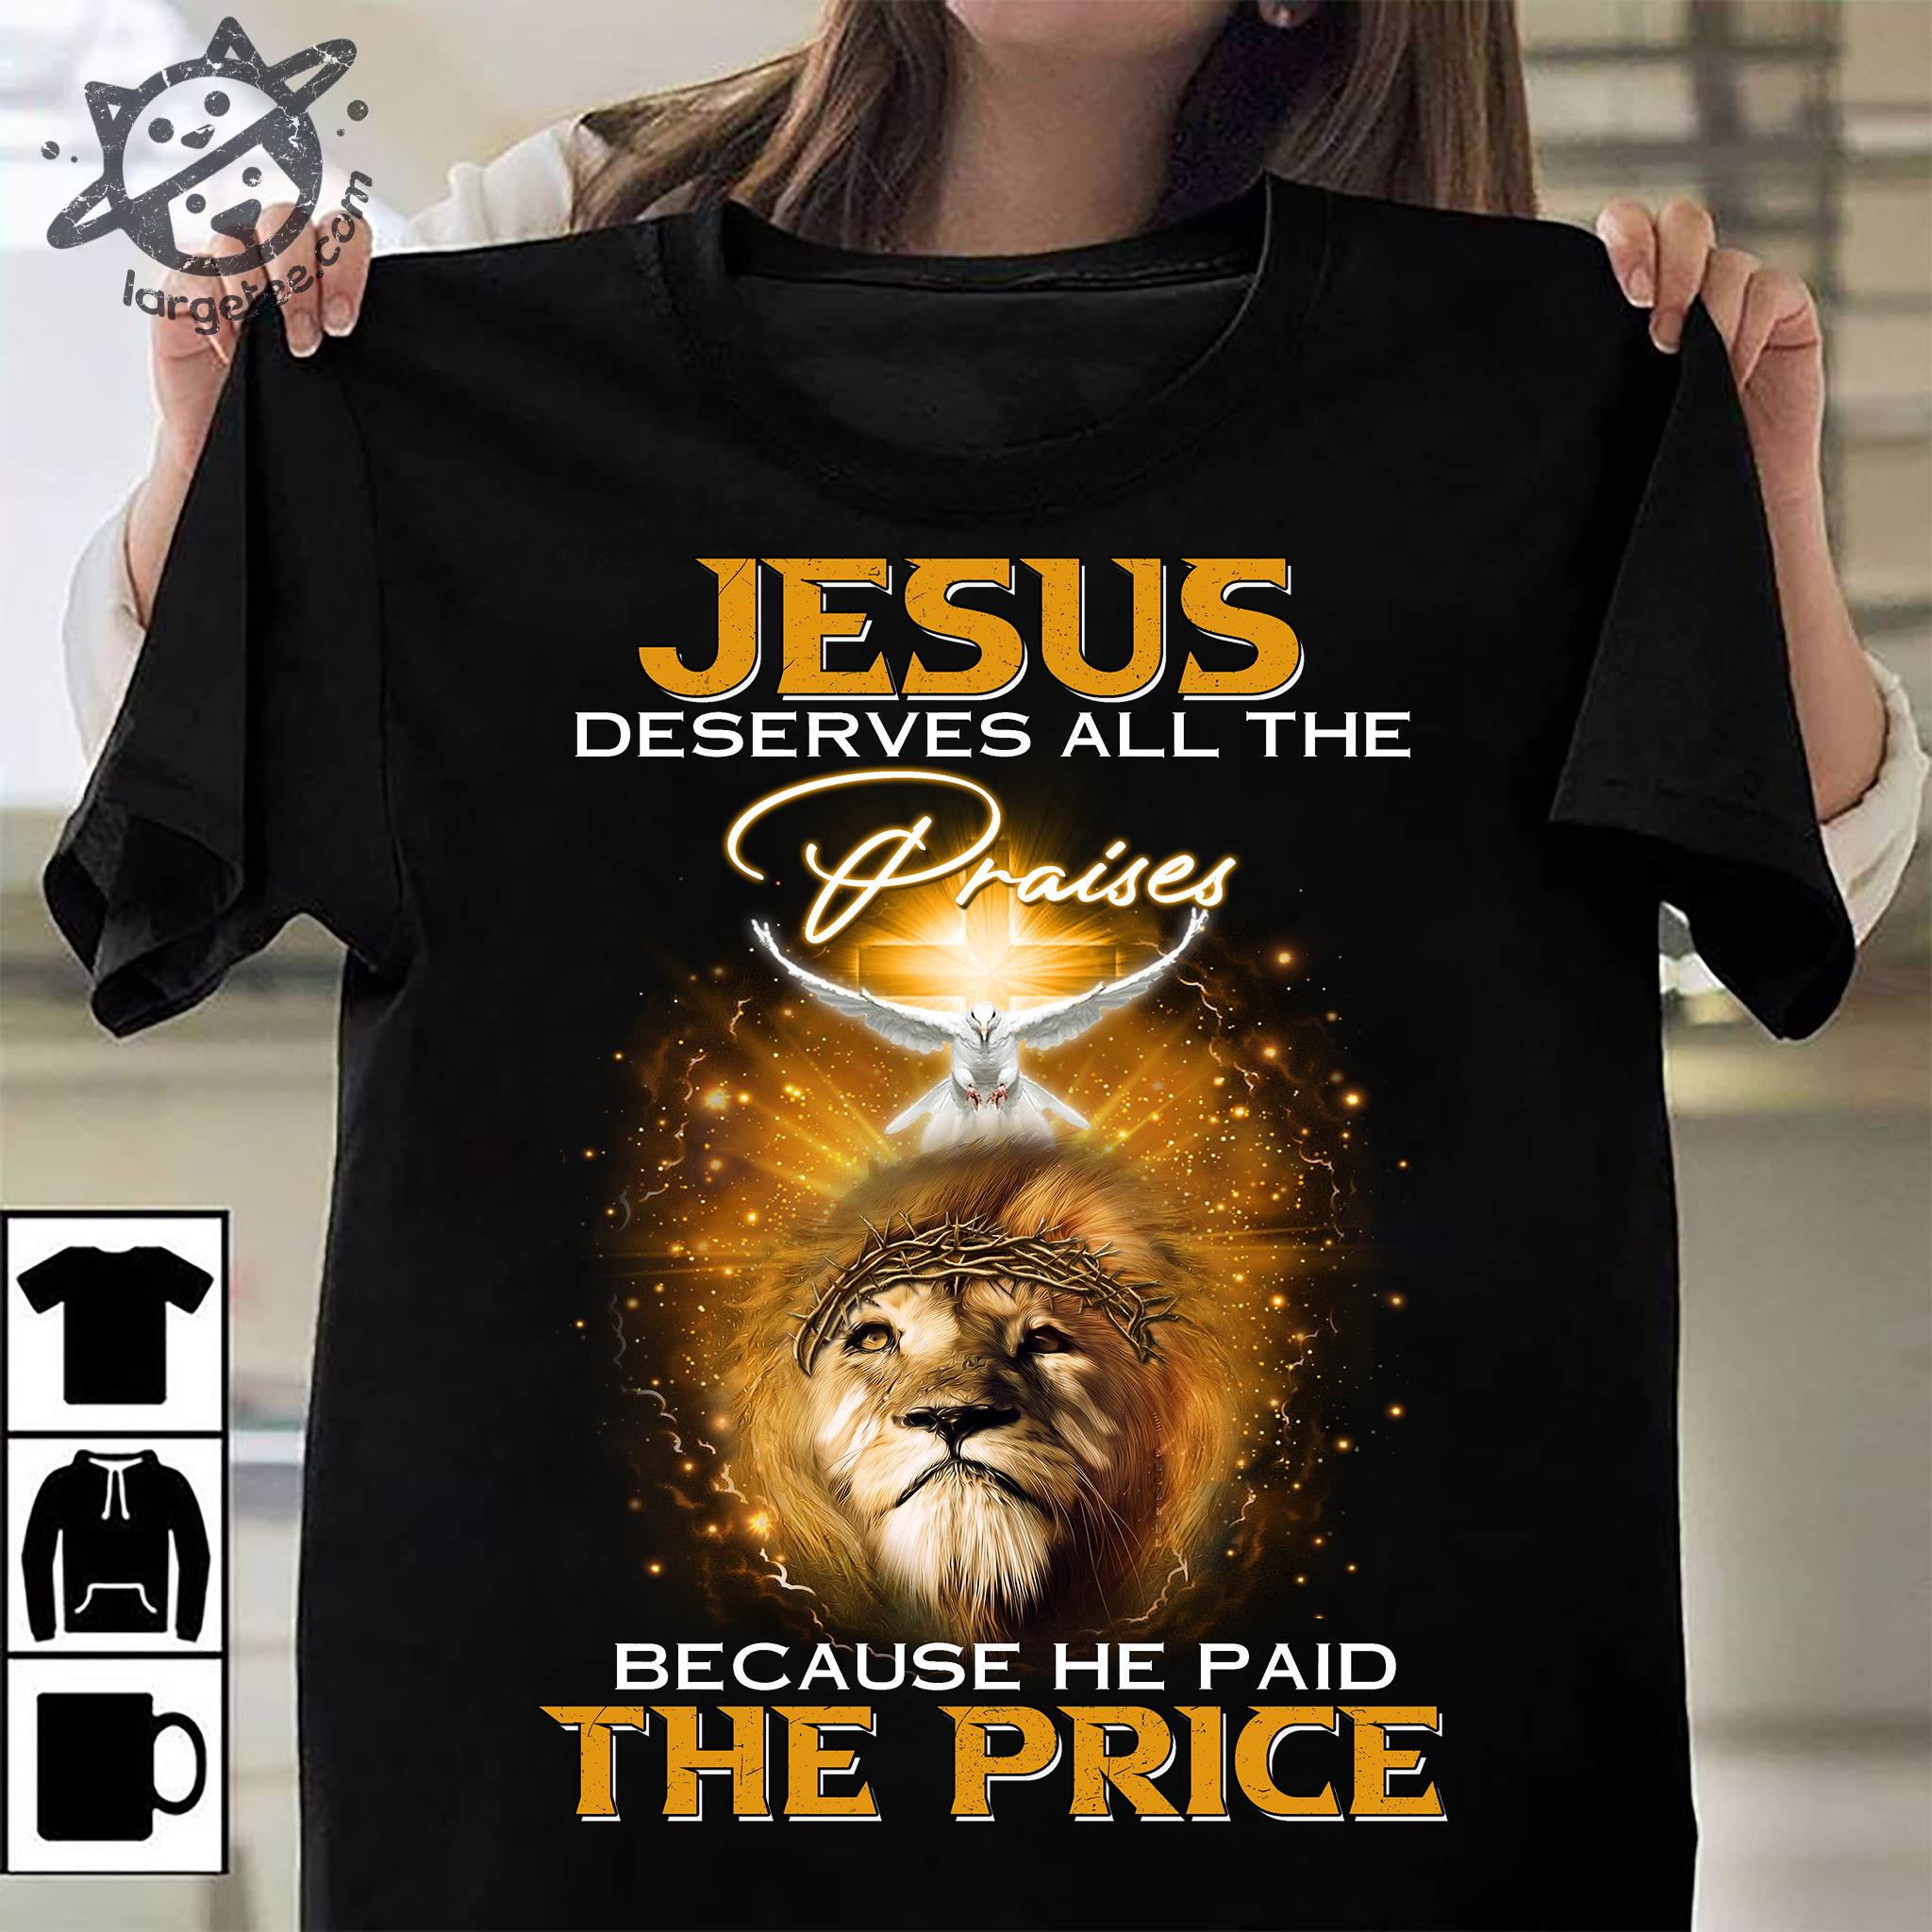 Jesus deserves all the praises because he paid the price - Lion and god